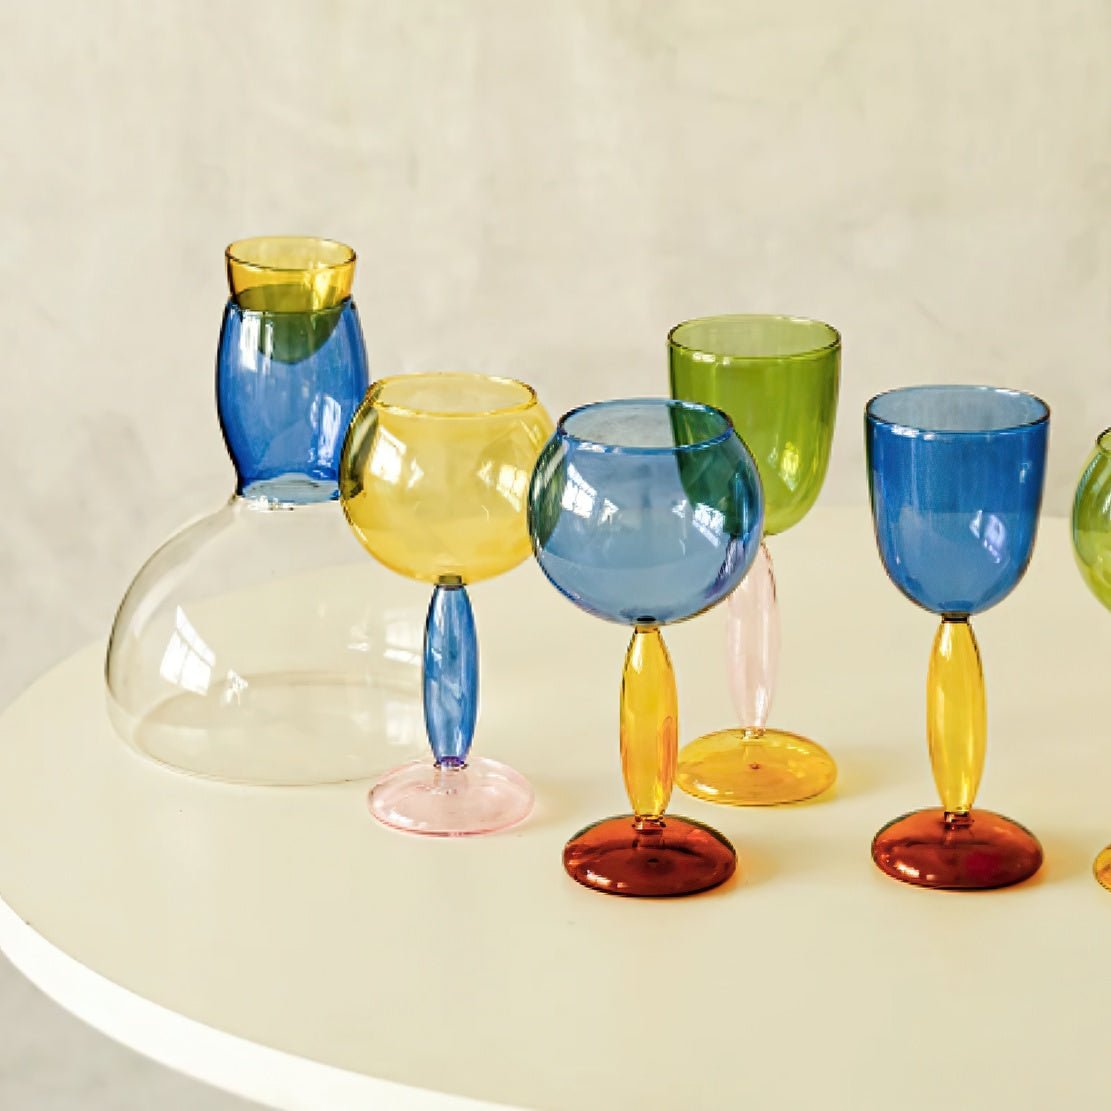 Colourful glassware decorative kitchen goblet and drinking glasses.